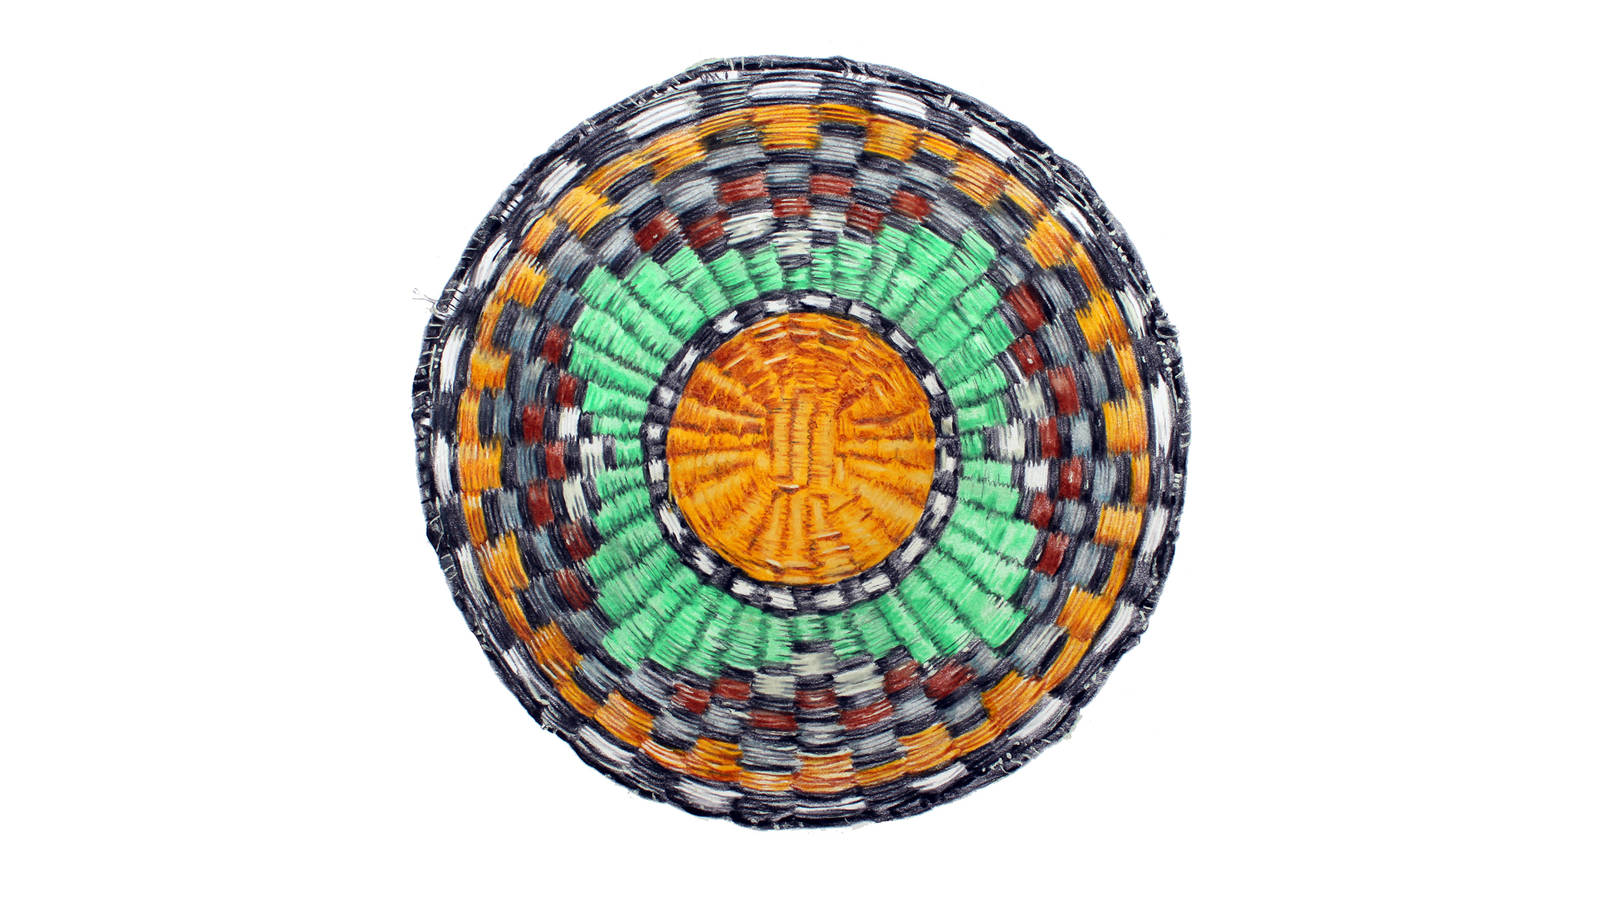 <h3 style="text-align: center; padding: 50px;"><span class="text-Intro-style">A woven tray at Hubbell Trading Post. Known as Hopi plaques, these trays are made by Hopi women from Munqapi and the Third Mesa area. Colored pencil on paper, 2019. </span></h3>